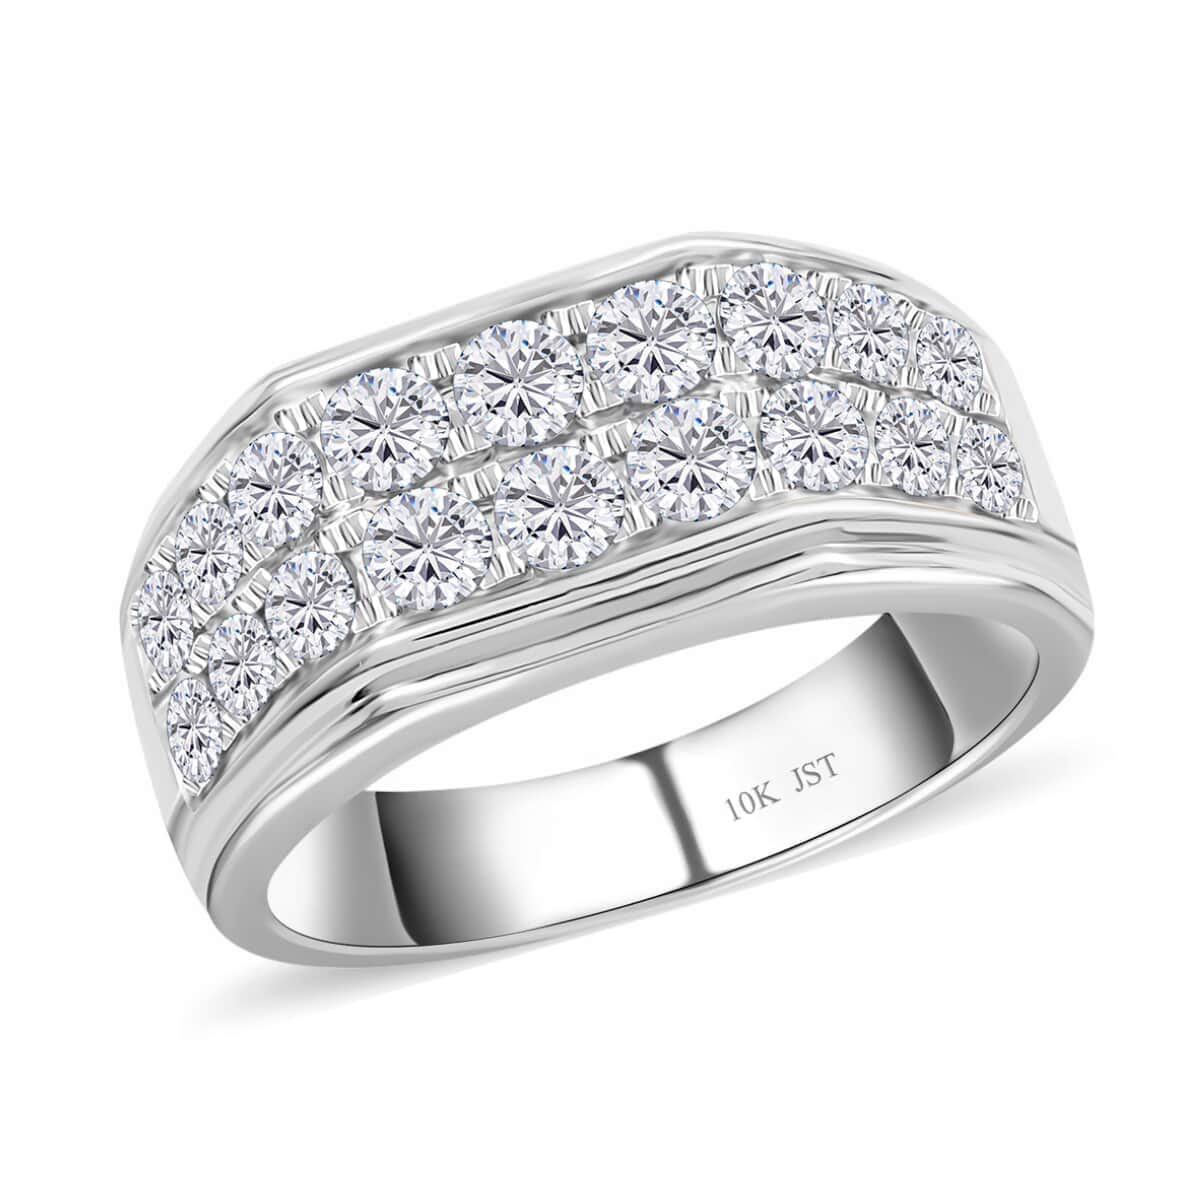 Buy Diamond Men's Ring in 14K YG Over Sterling Silver, Diamond Ring, Engagement  Rings For Men (Size 10.0) 1.00 ctw at ShopLC.